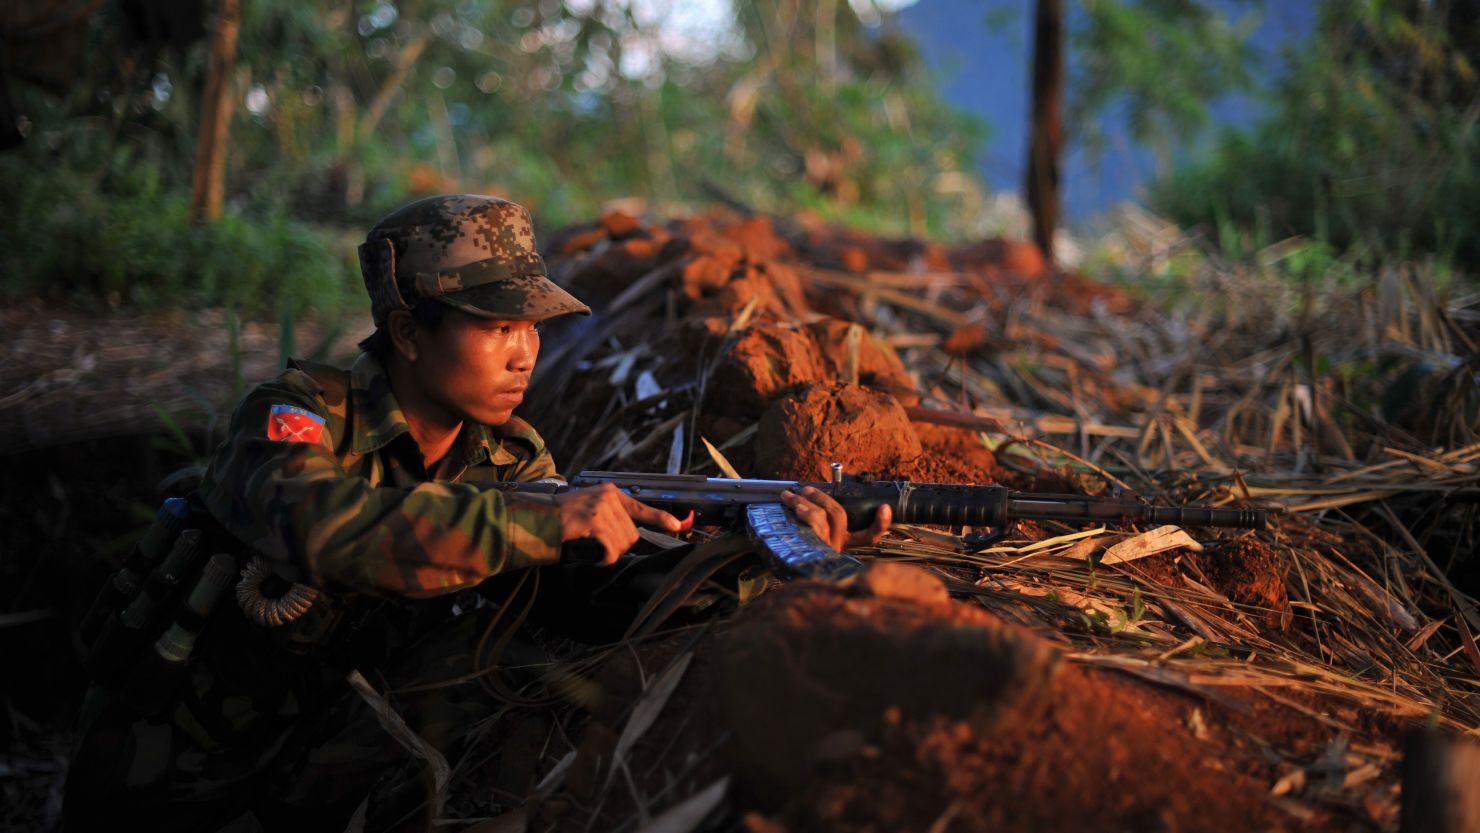 (File) A soldier from All Burma Students Democratic Front - Northern Burma, an ally of KIA on September 22, 2012.